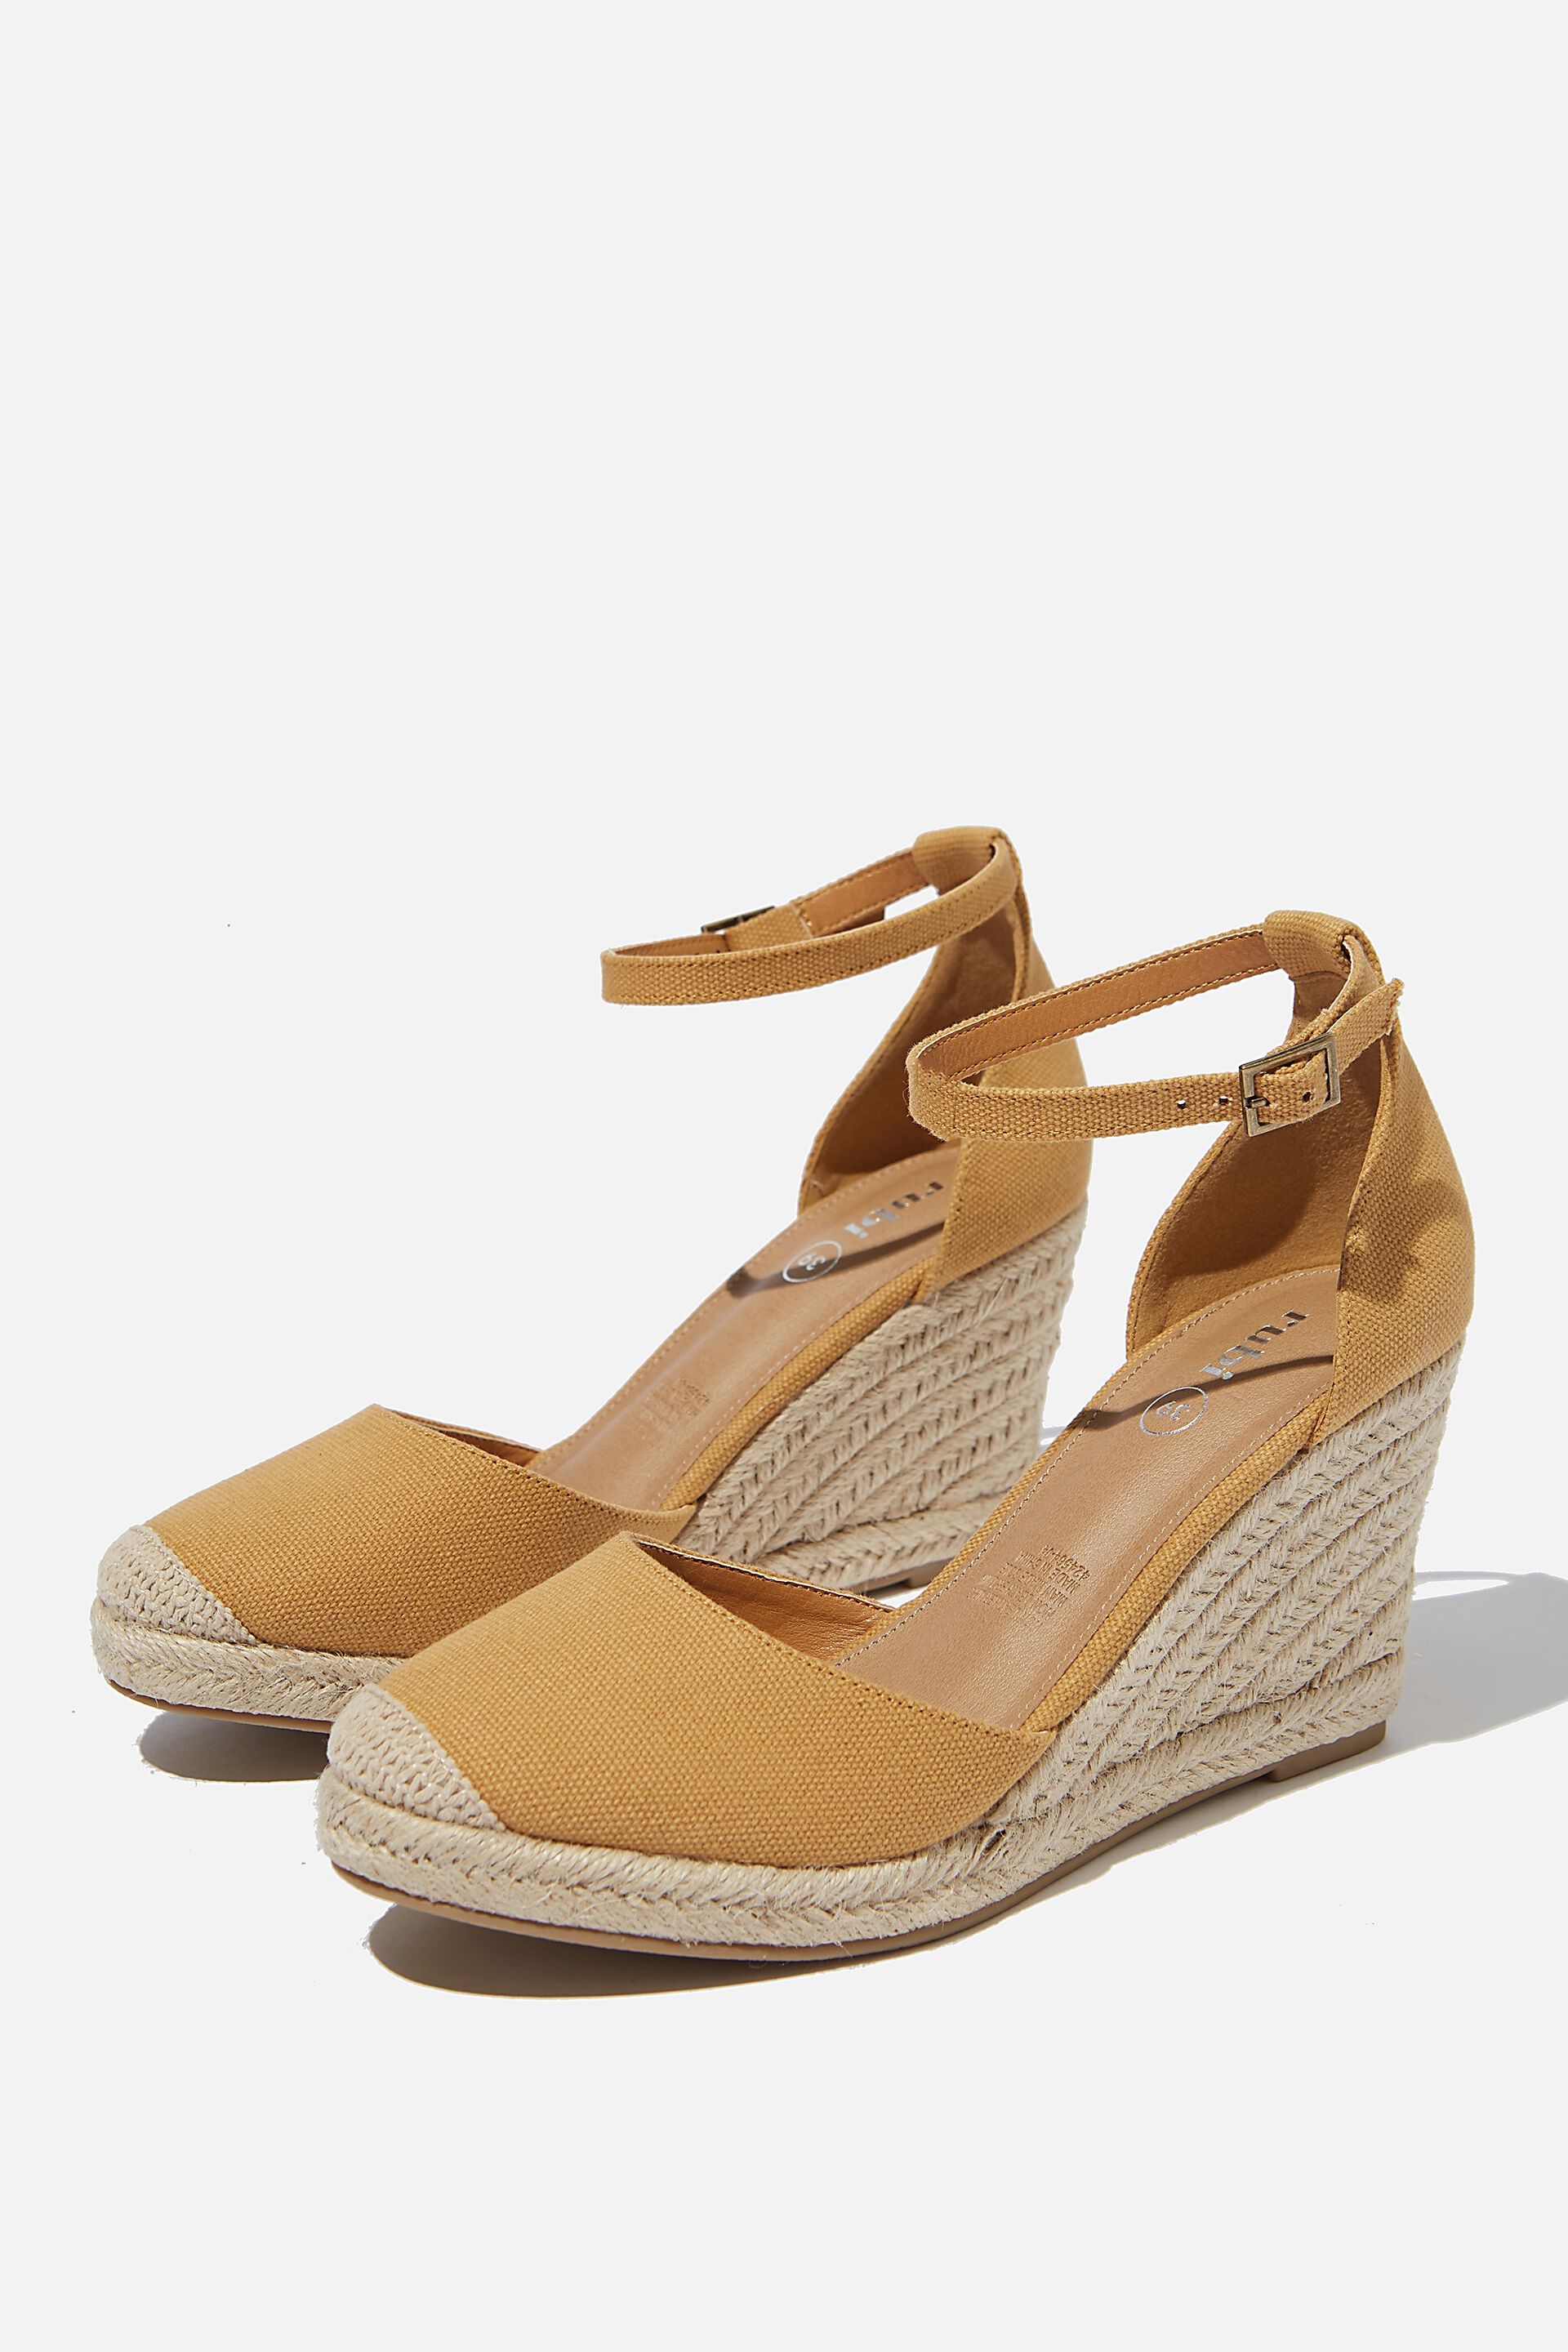 covered toe wedges